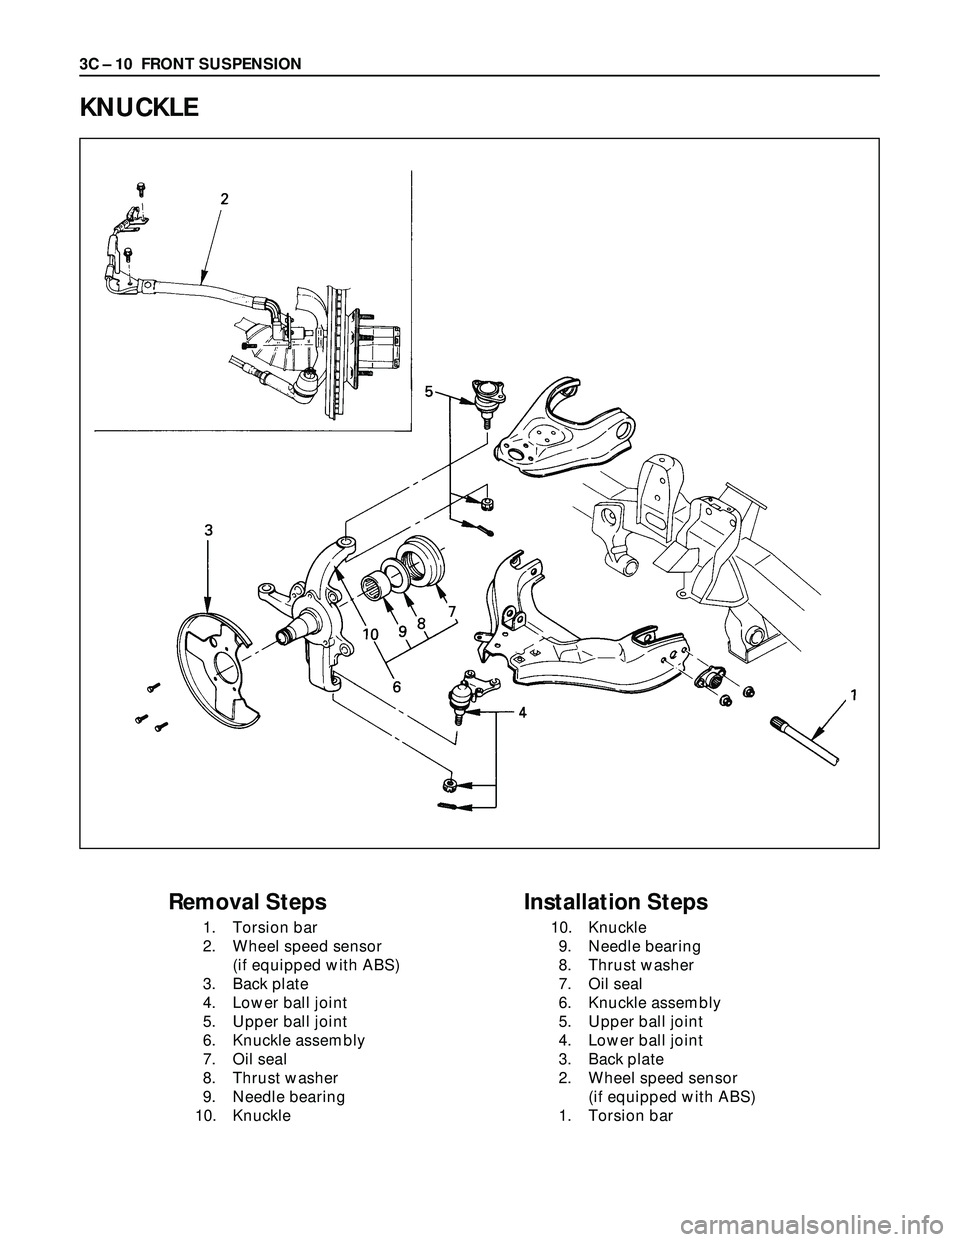 ISUZU TROOPER 1998  Service Repair Manual 3C – 10 FRONT SUSPENSION
KNUCKLE
Removal Steps
1. Torsion bar
2. Wheel speed sensor
(if equipped with ABS)
3. Back plate
4. Lower ball joint
5. Upper ball joint
6. Knuckle assembly
7. Oil seal
8. Th